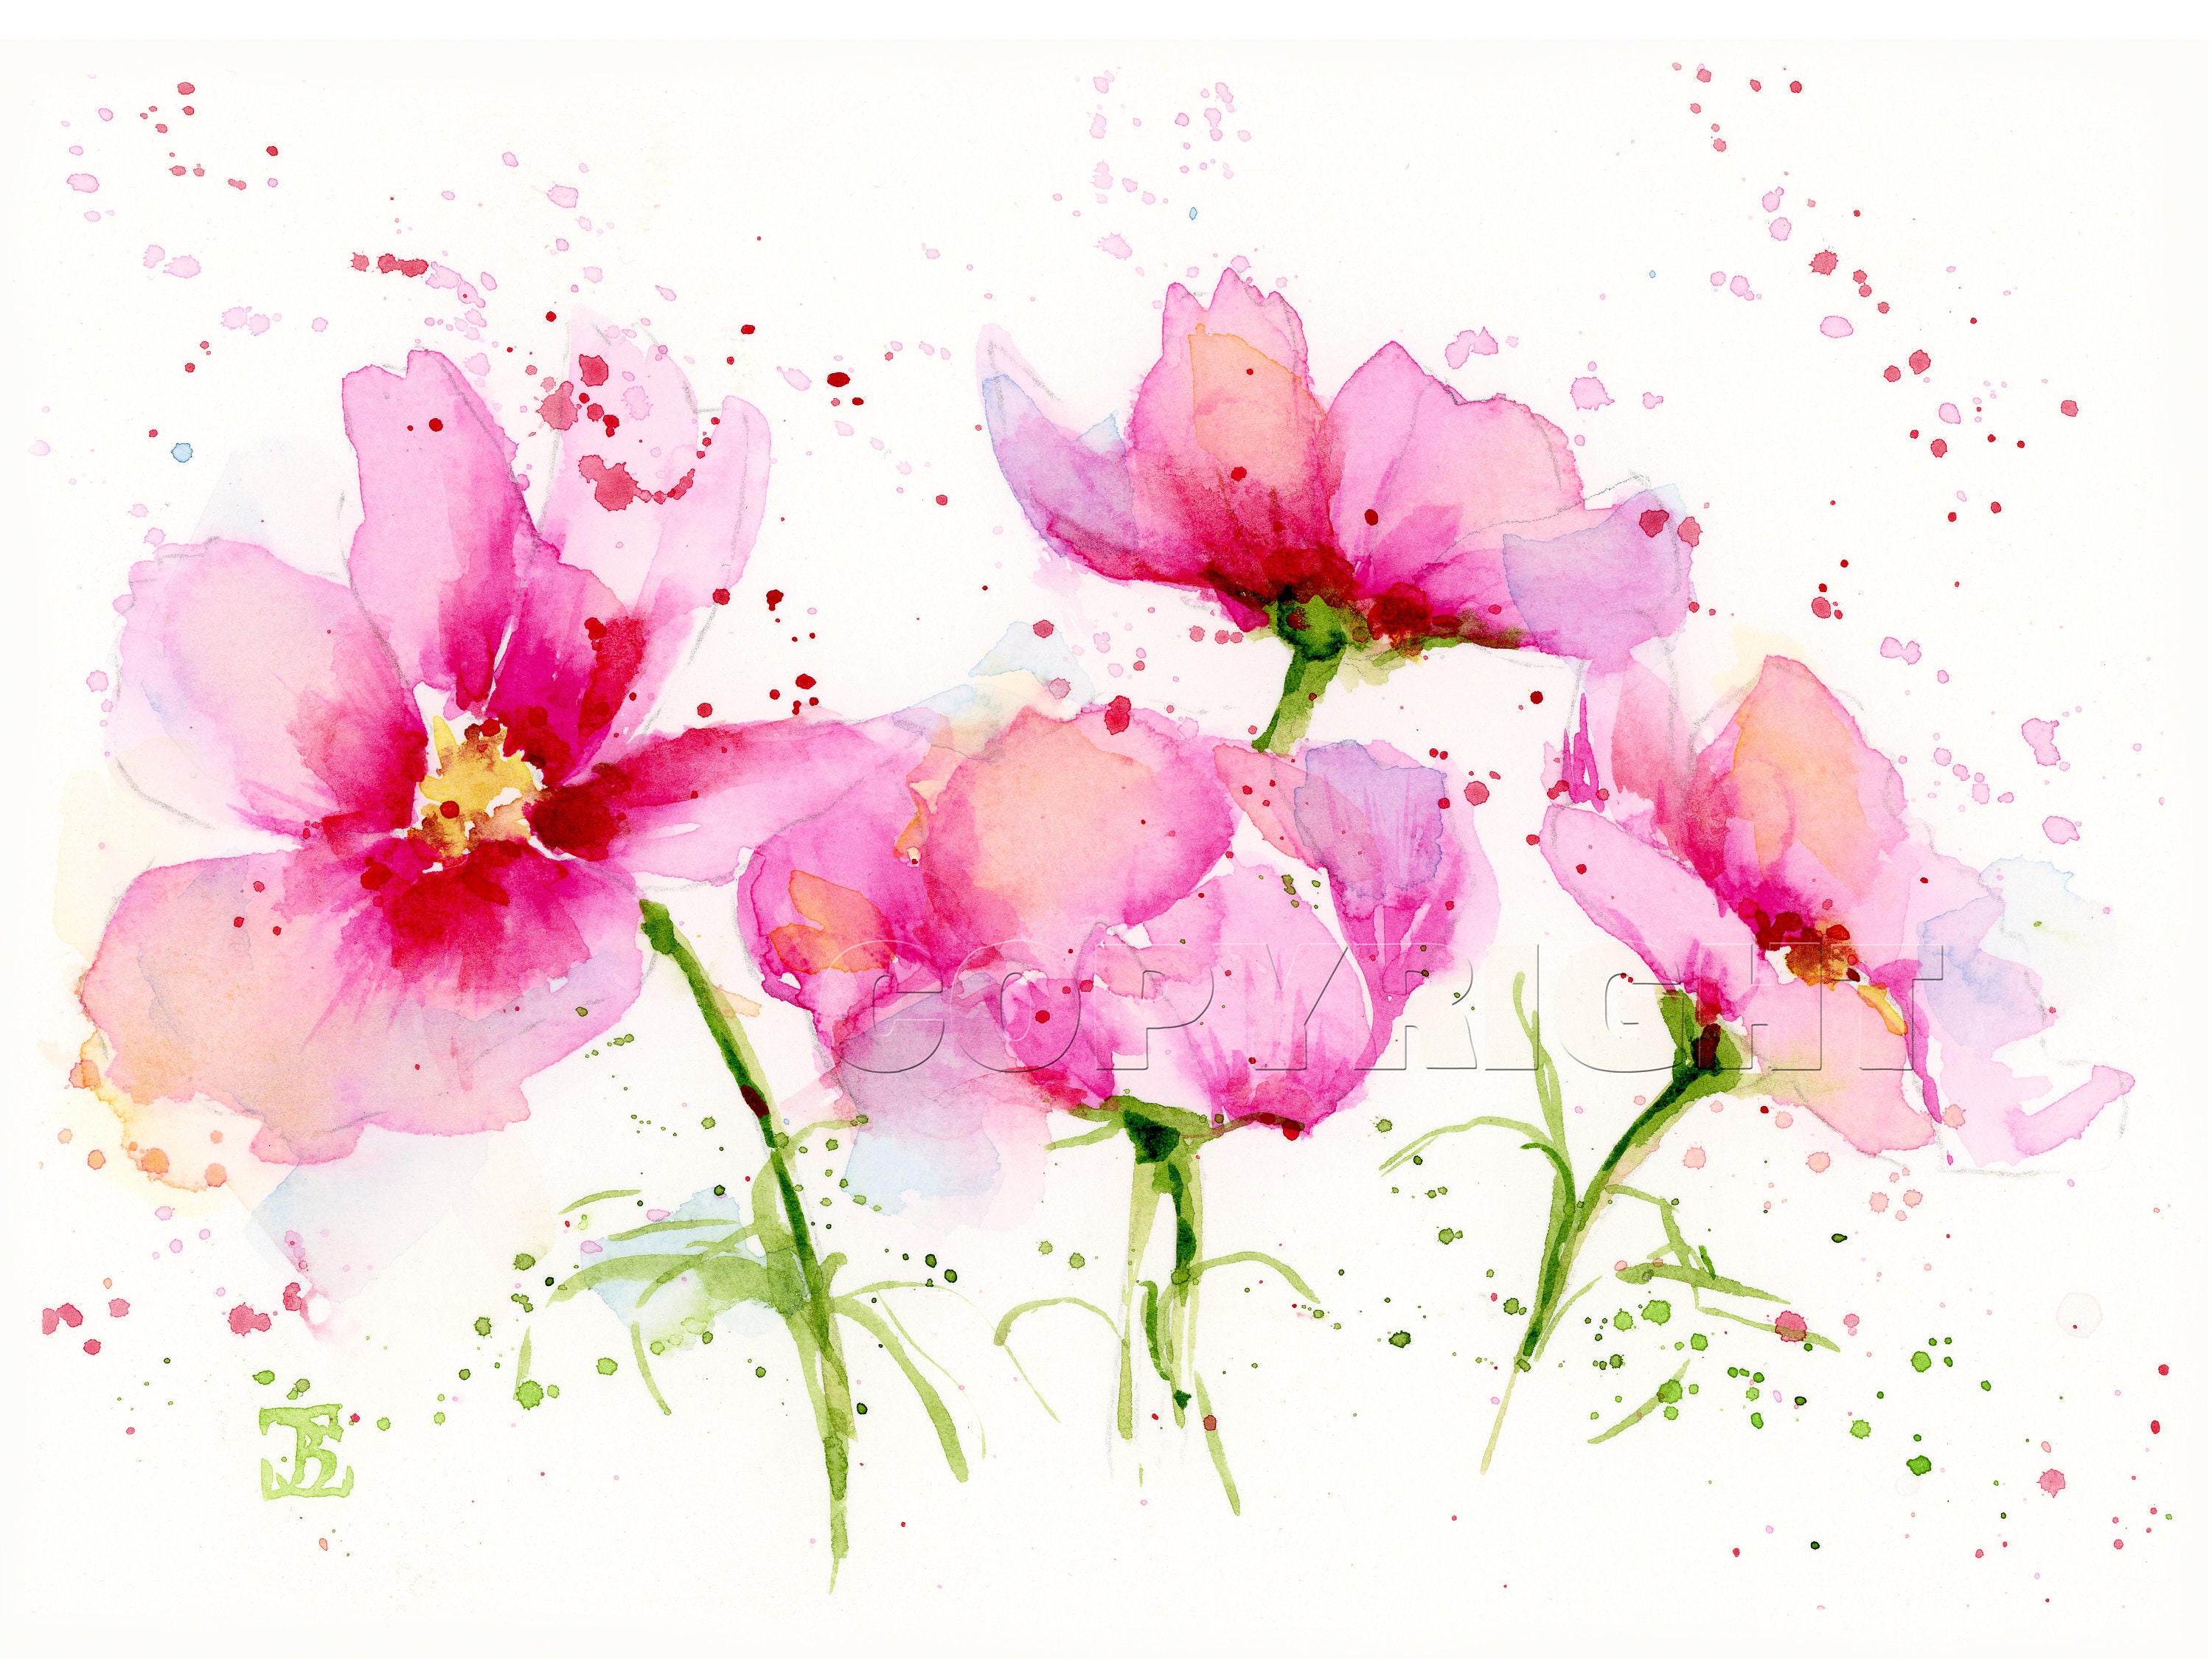 PINK FLOWERS Print, Flowers Watercolor Painting, Pink Floral Art, Home  Decor, Flowers Wall Art, Gift Idea, Bobapainting, Wall Art, Bedroom -   Canada